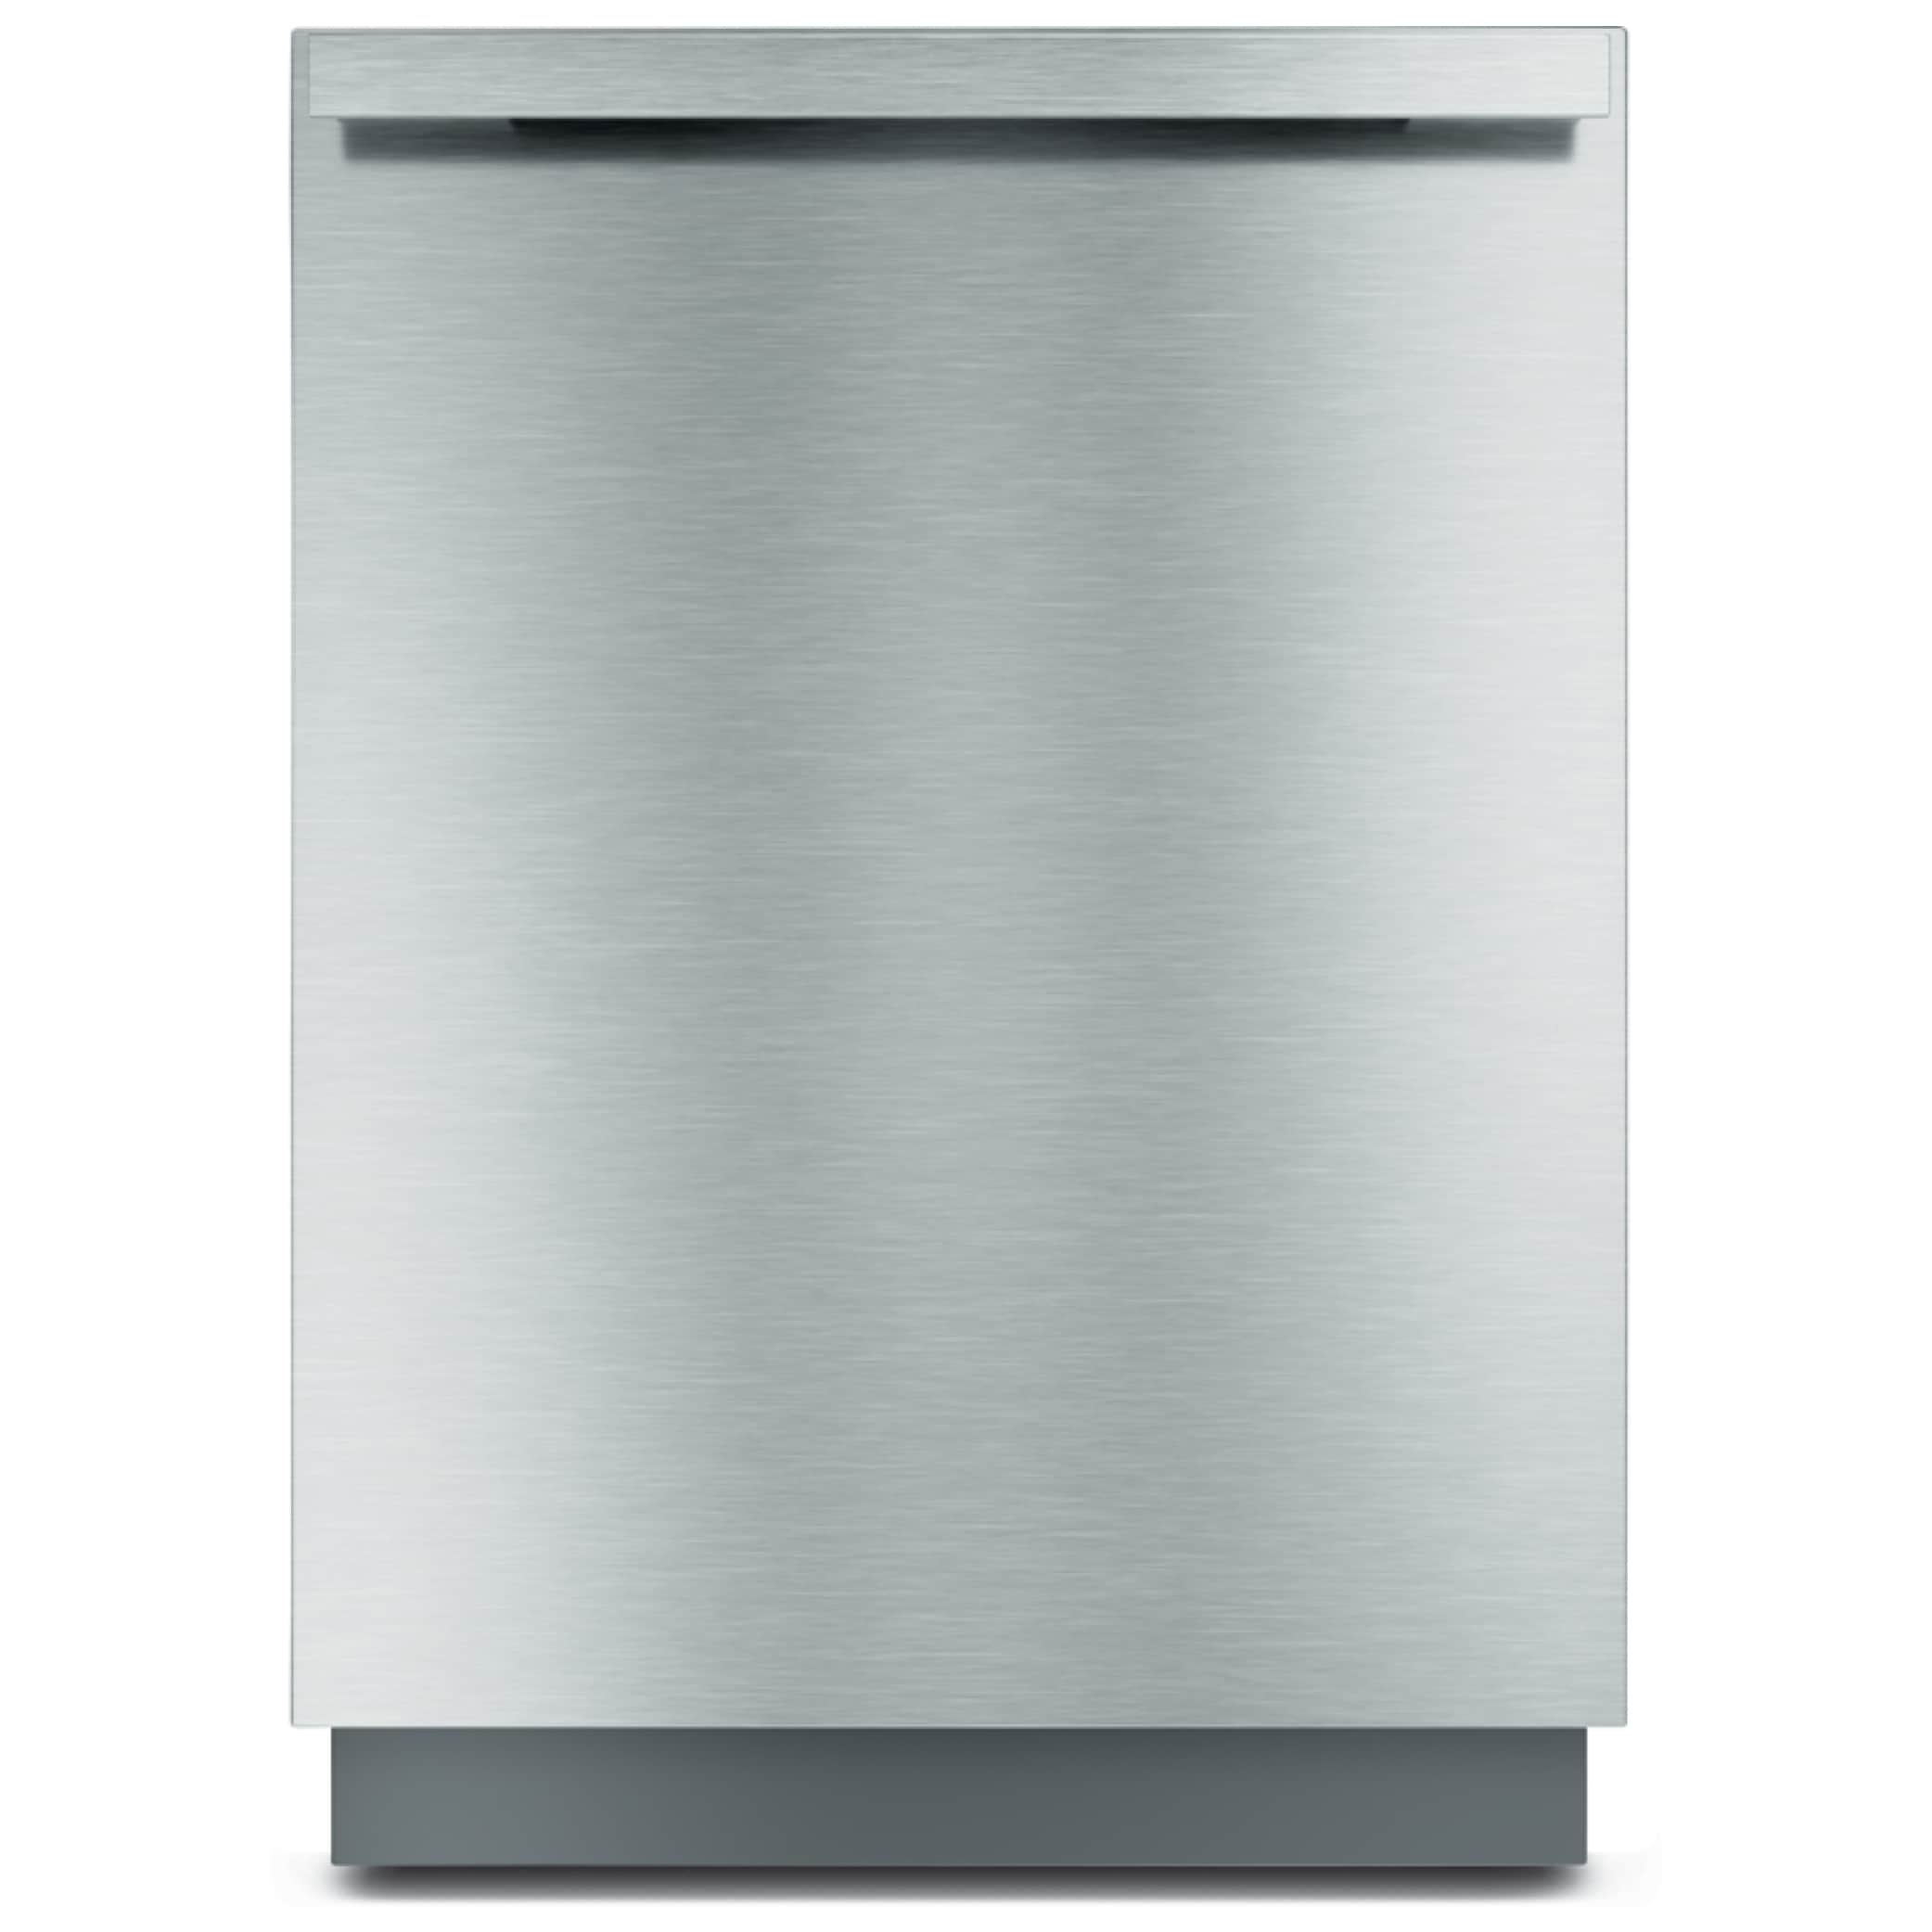 Miele AutoDos Top Control 24-in Smart Built-In Dishwasher With 